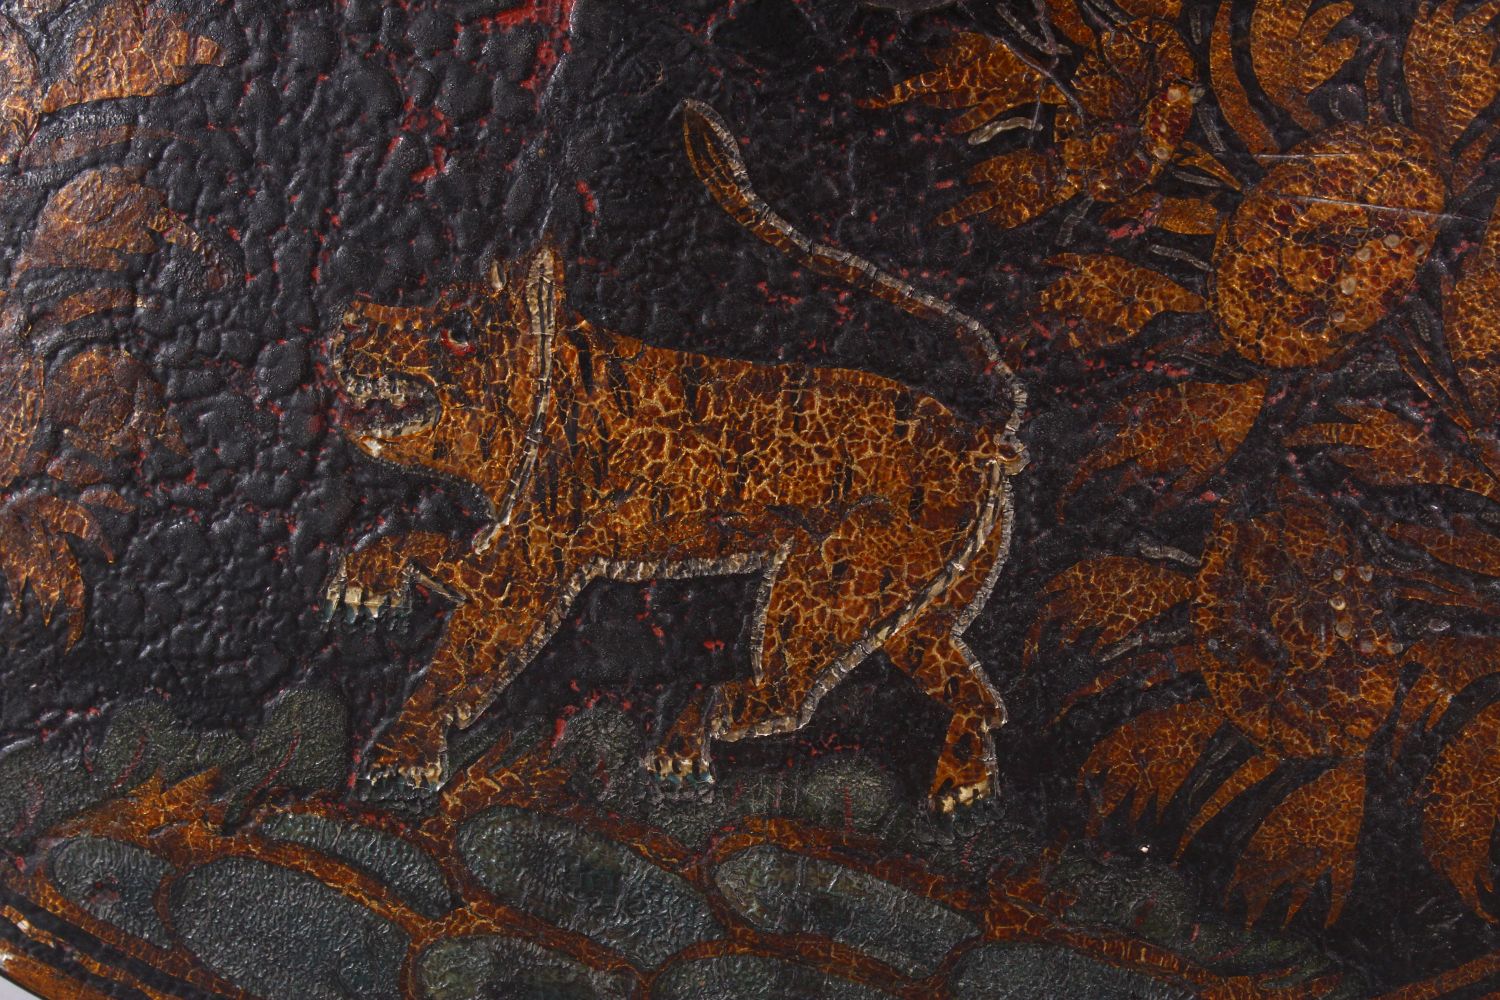 A FINE 18TH/19TH CENTURY INDIAN PAINTED LACQUER LEATHER SHIELD, decorated with a band of tigers, - Image 8 of 10